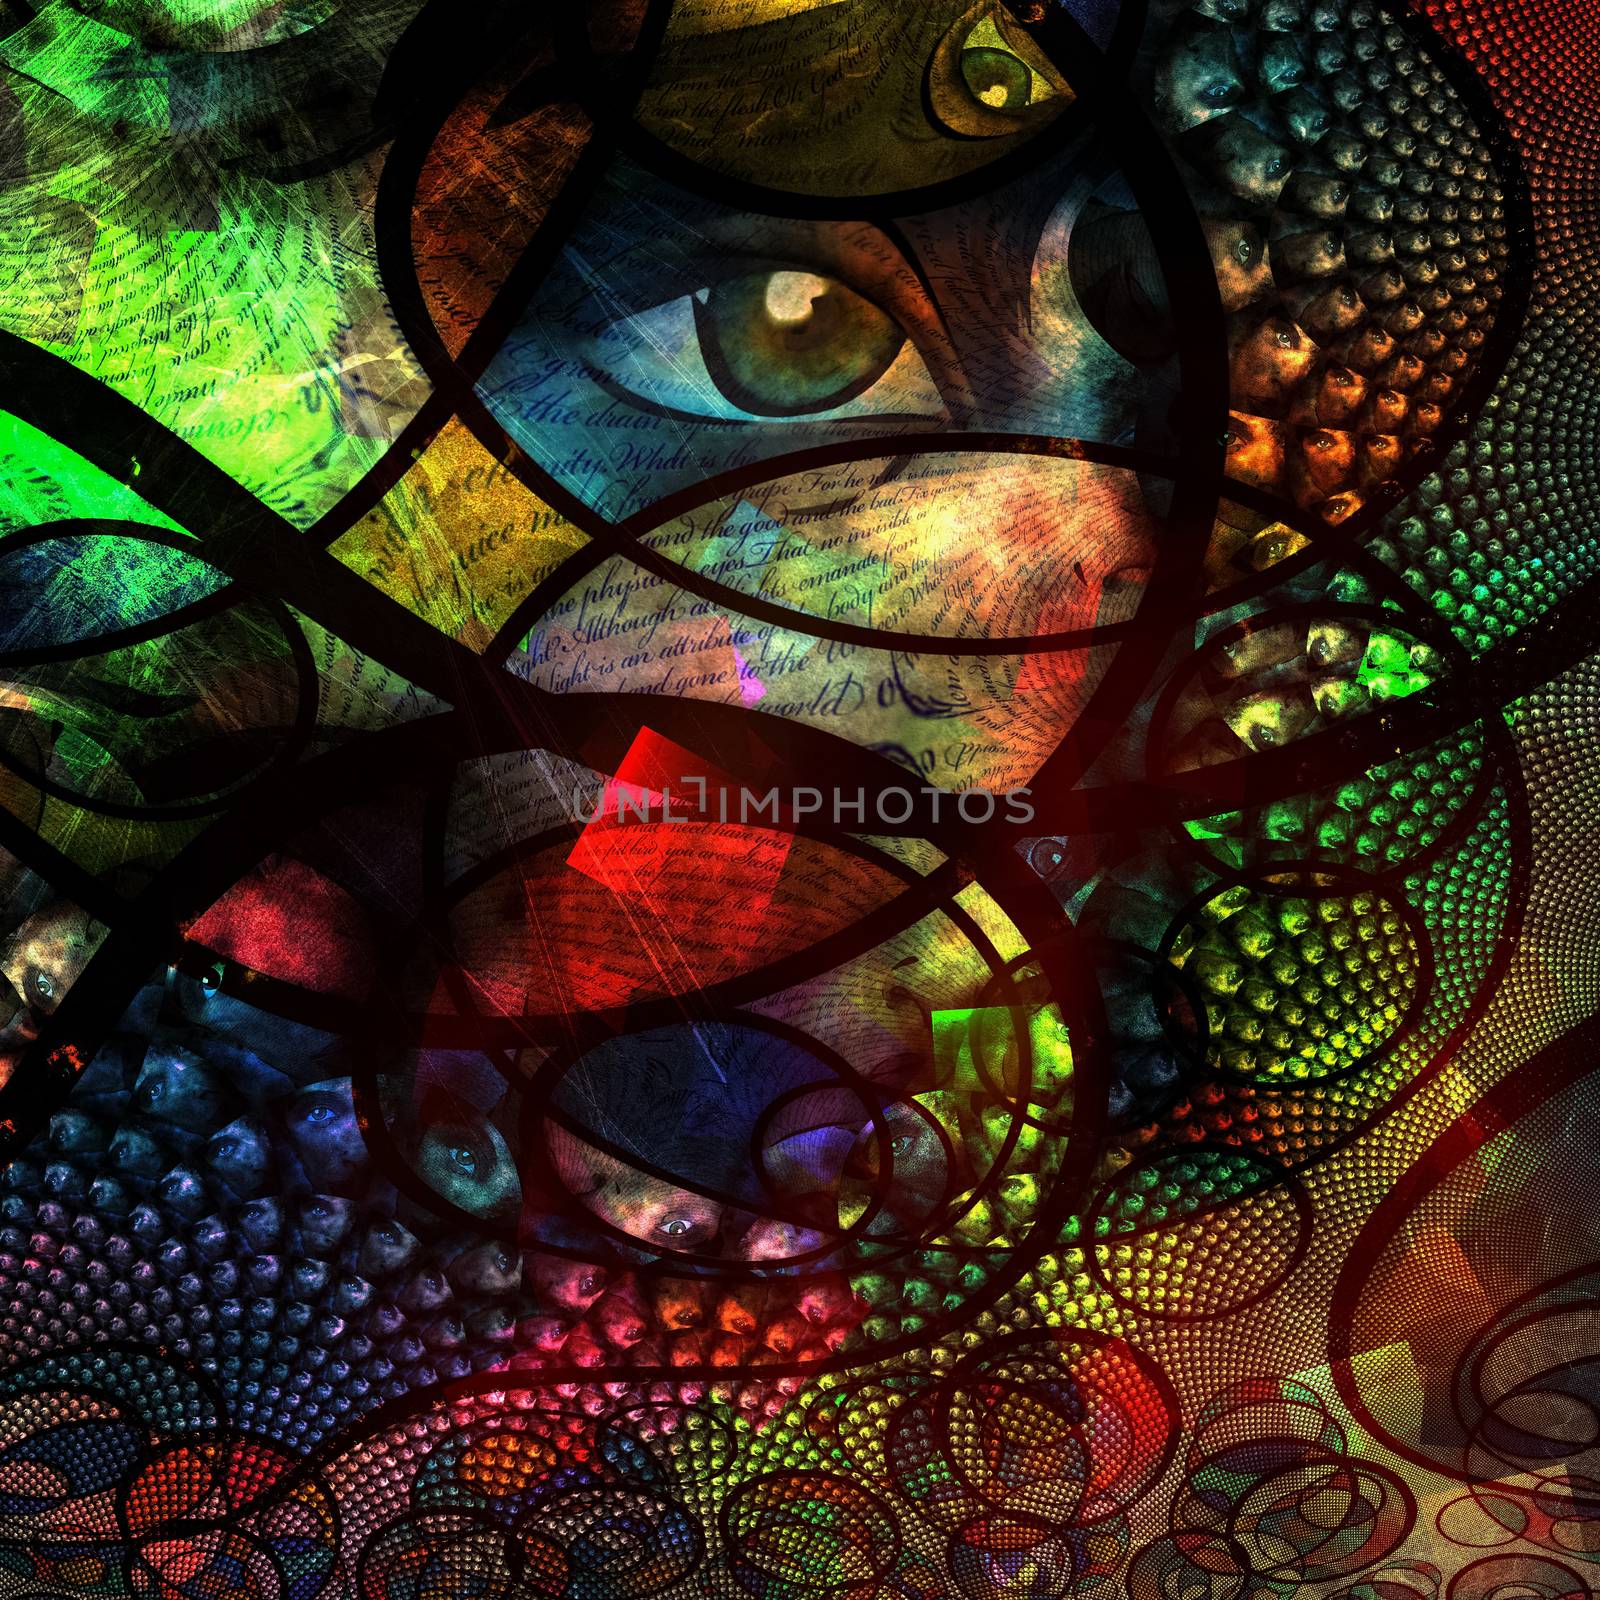 Abstract image with text and human eye